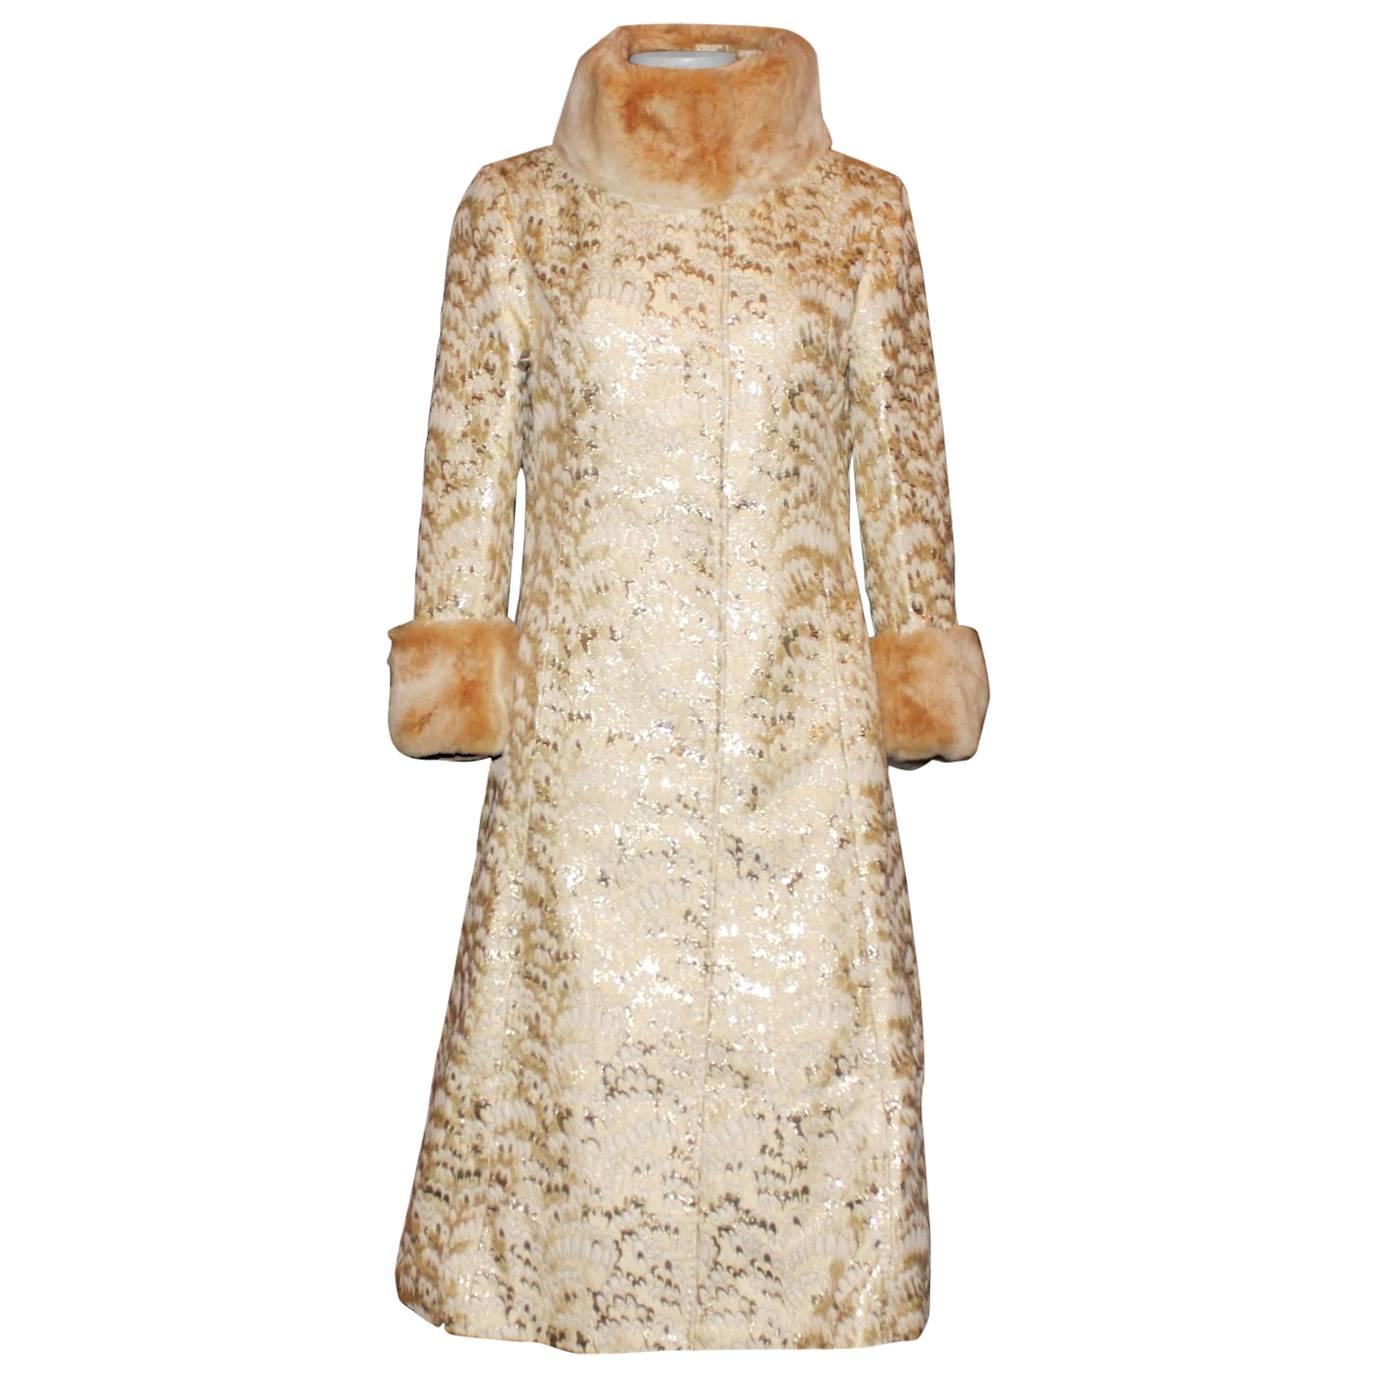 First Lady Melania's Dolce & Gabbana Couture Evening Fur Coat